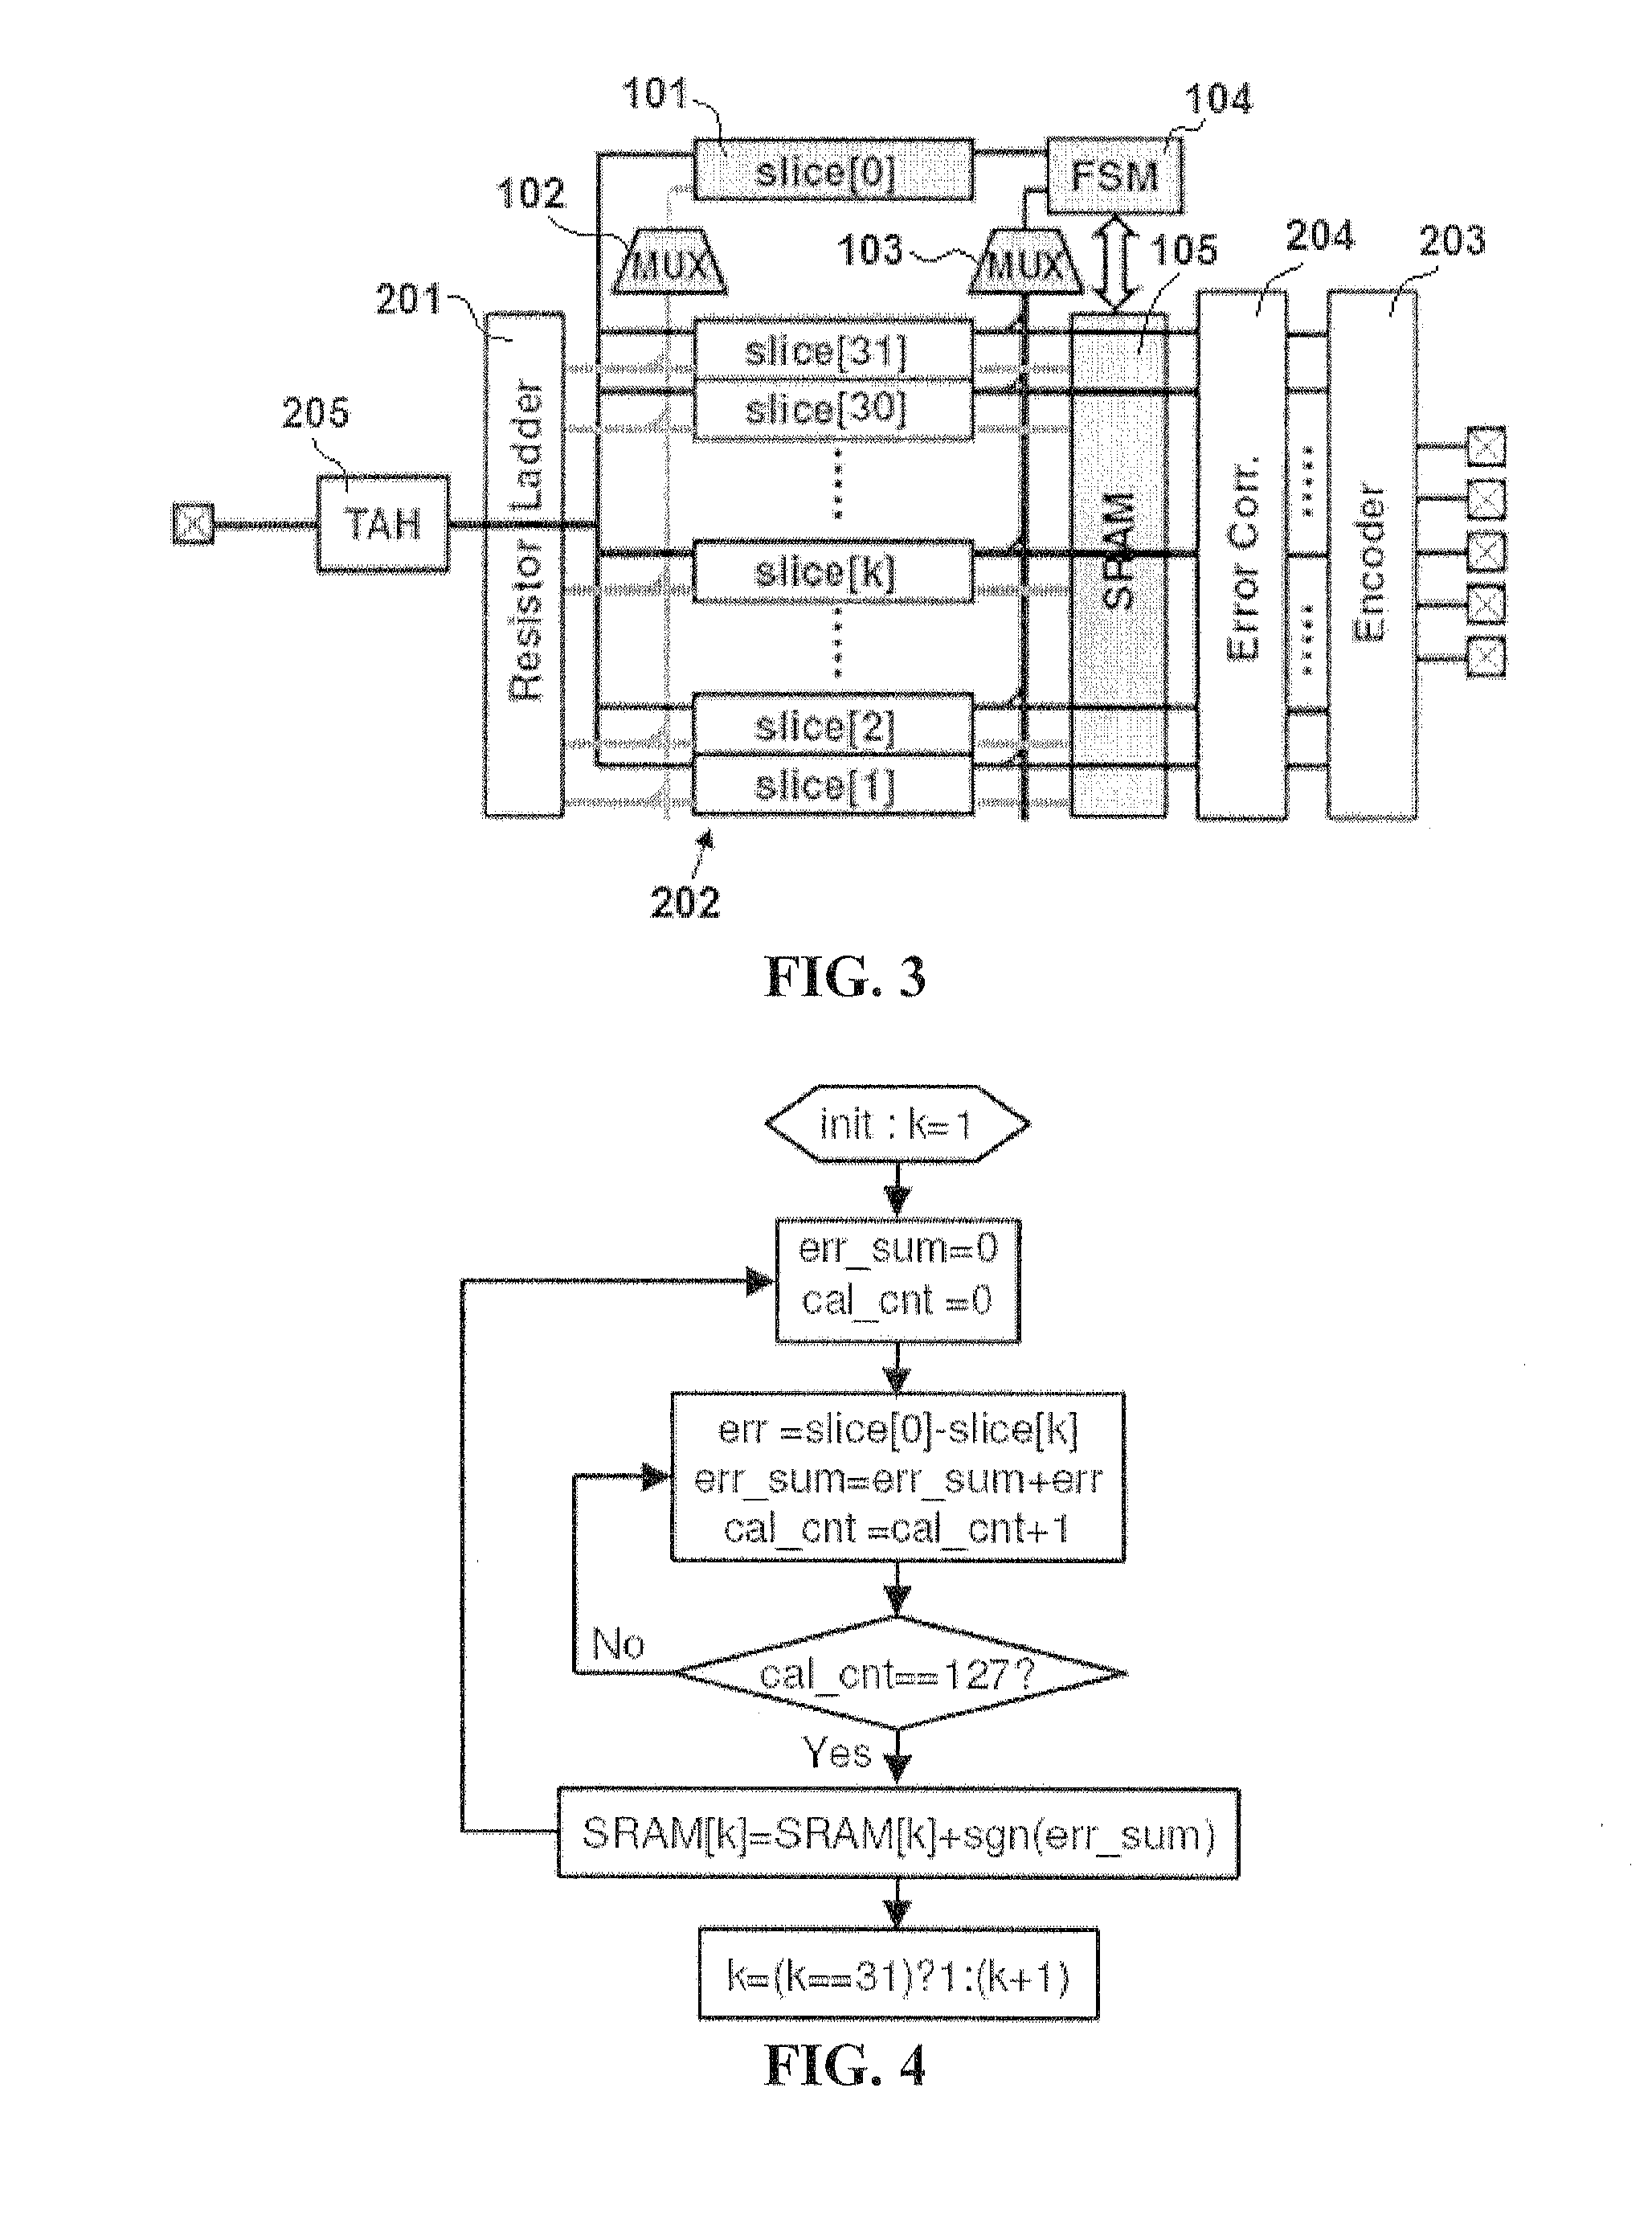 Self-healing analog-to-digital converters with background calibration